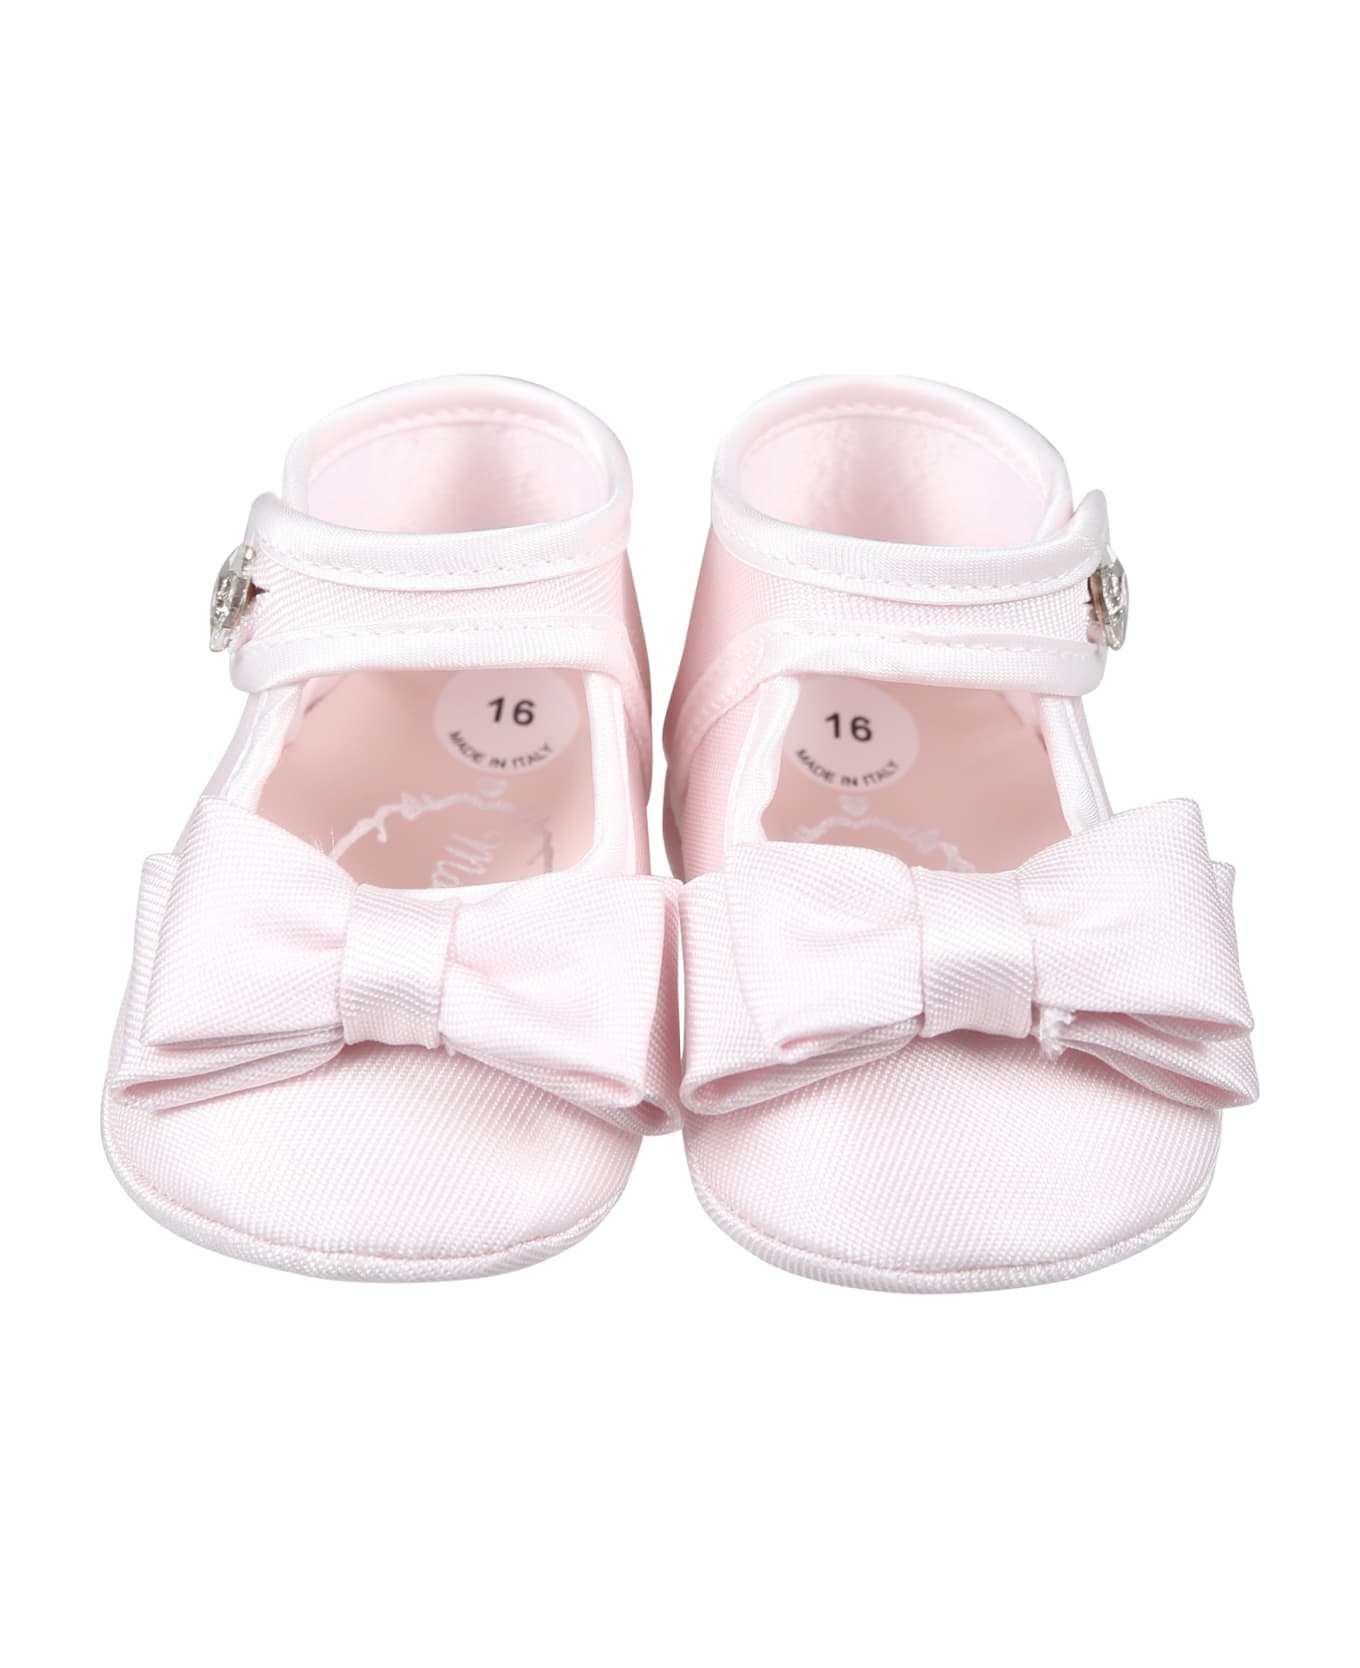 Monnalisa Pink Flat Shoes For Baby Girl With Bow - Pink